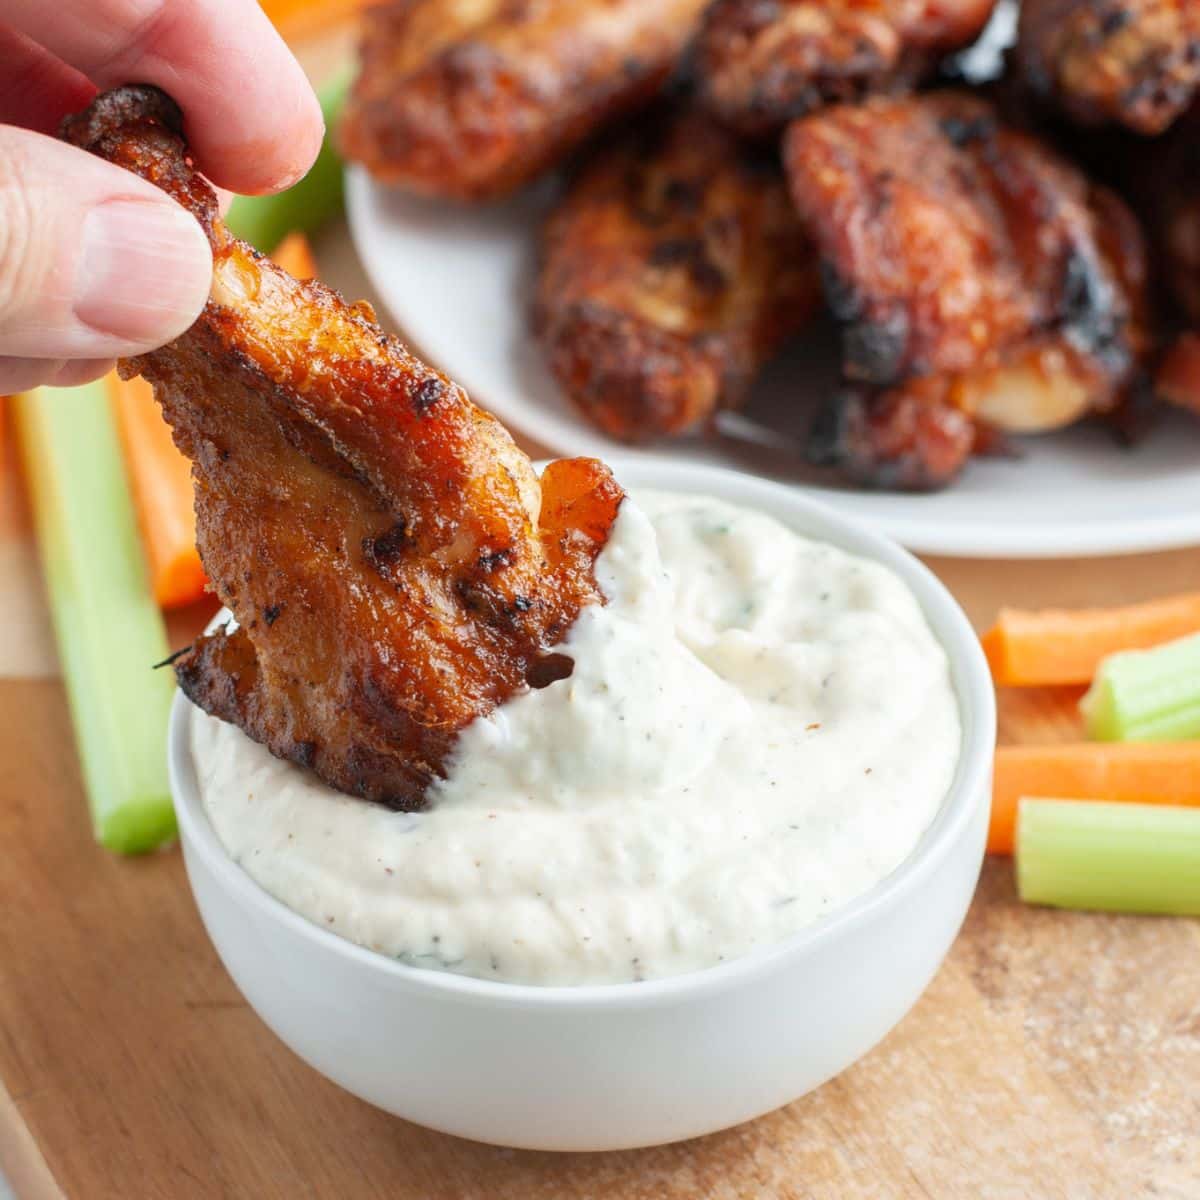 Chicken wing dipping into creamy sauce. 